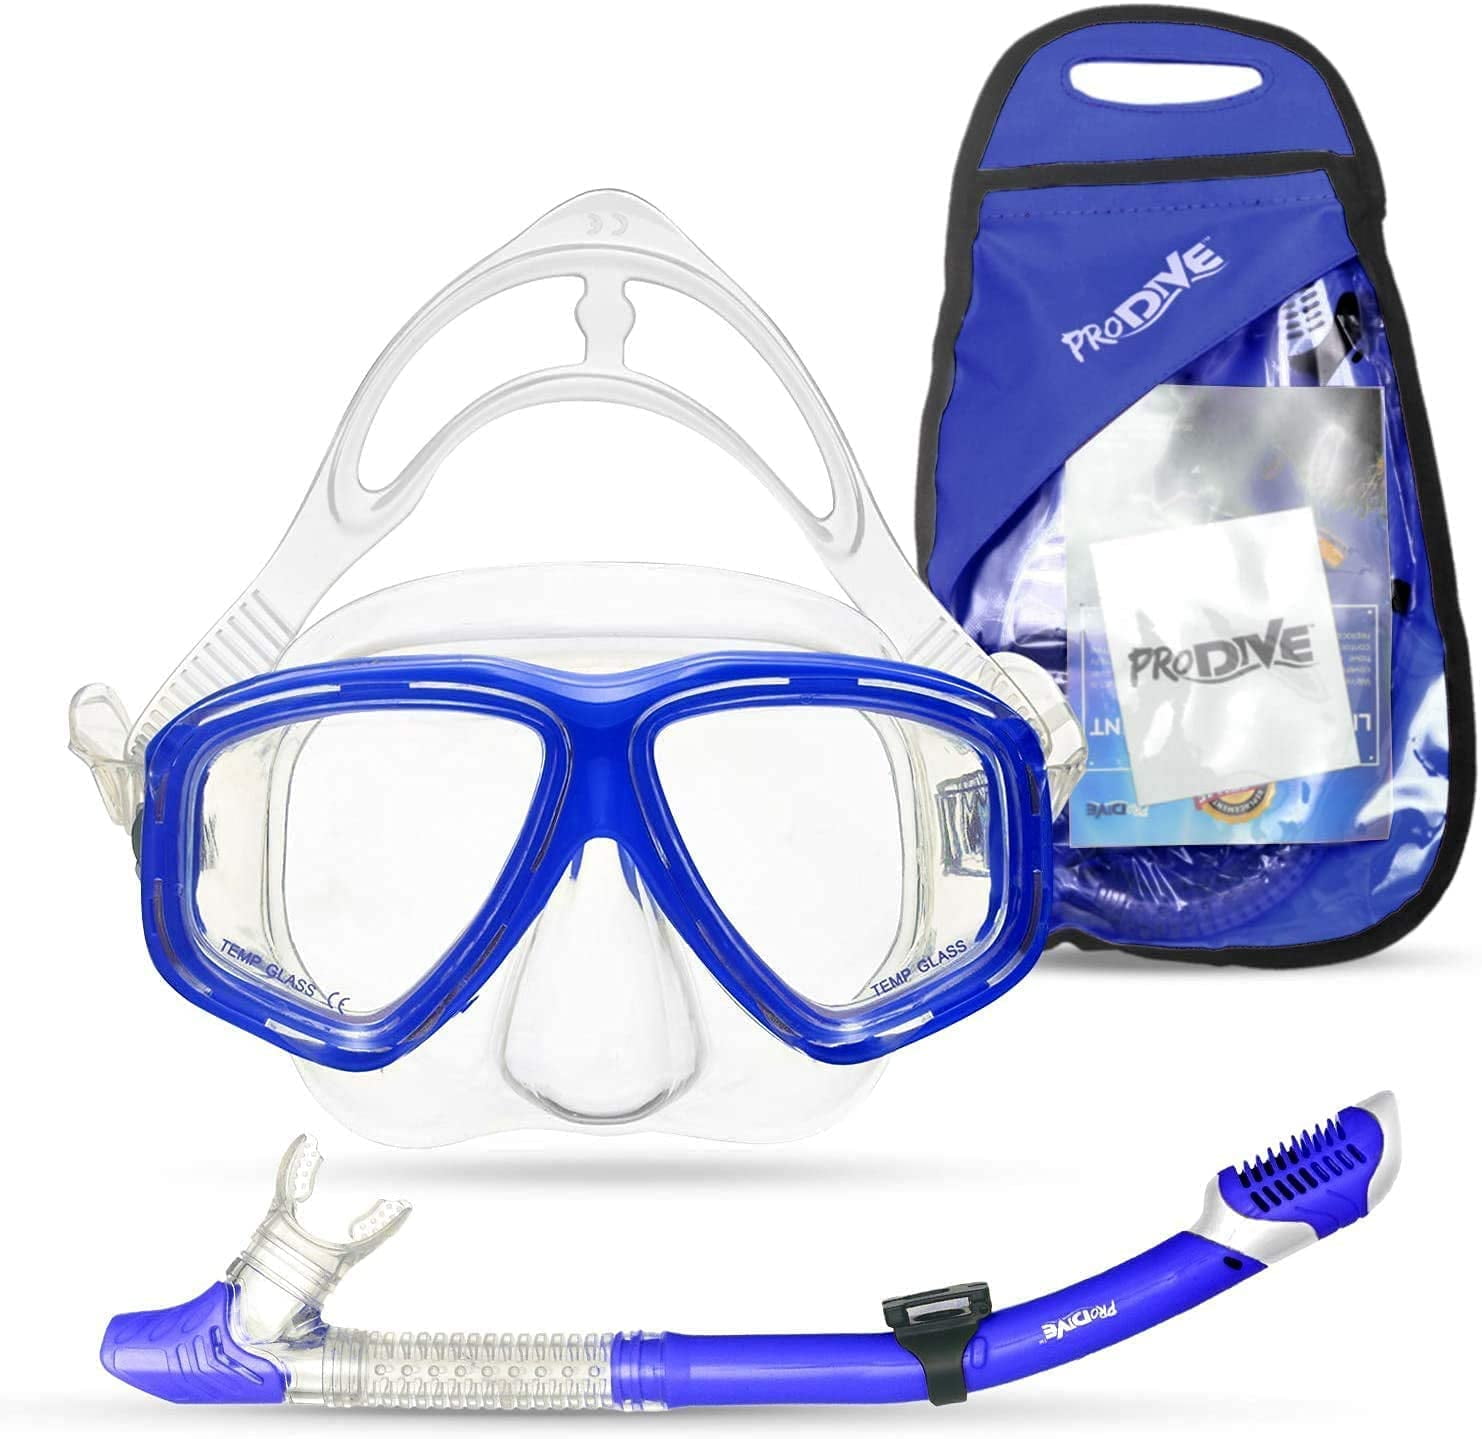 Professional Adult Diving Goggles Anti-Fog Scuba Mask w/Tempered Glass Lens 